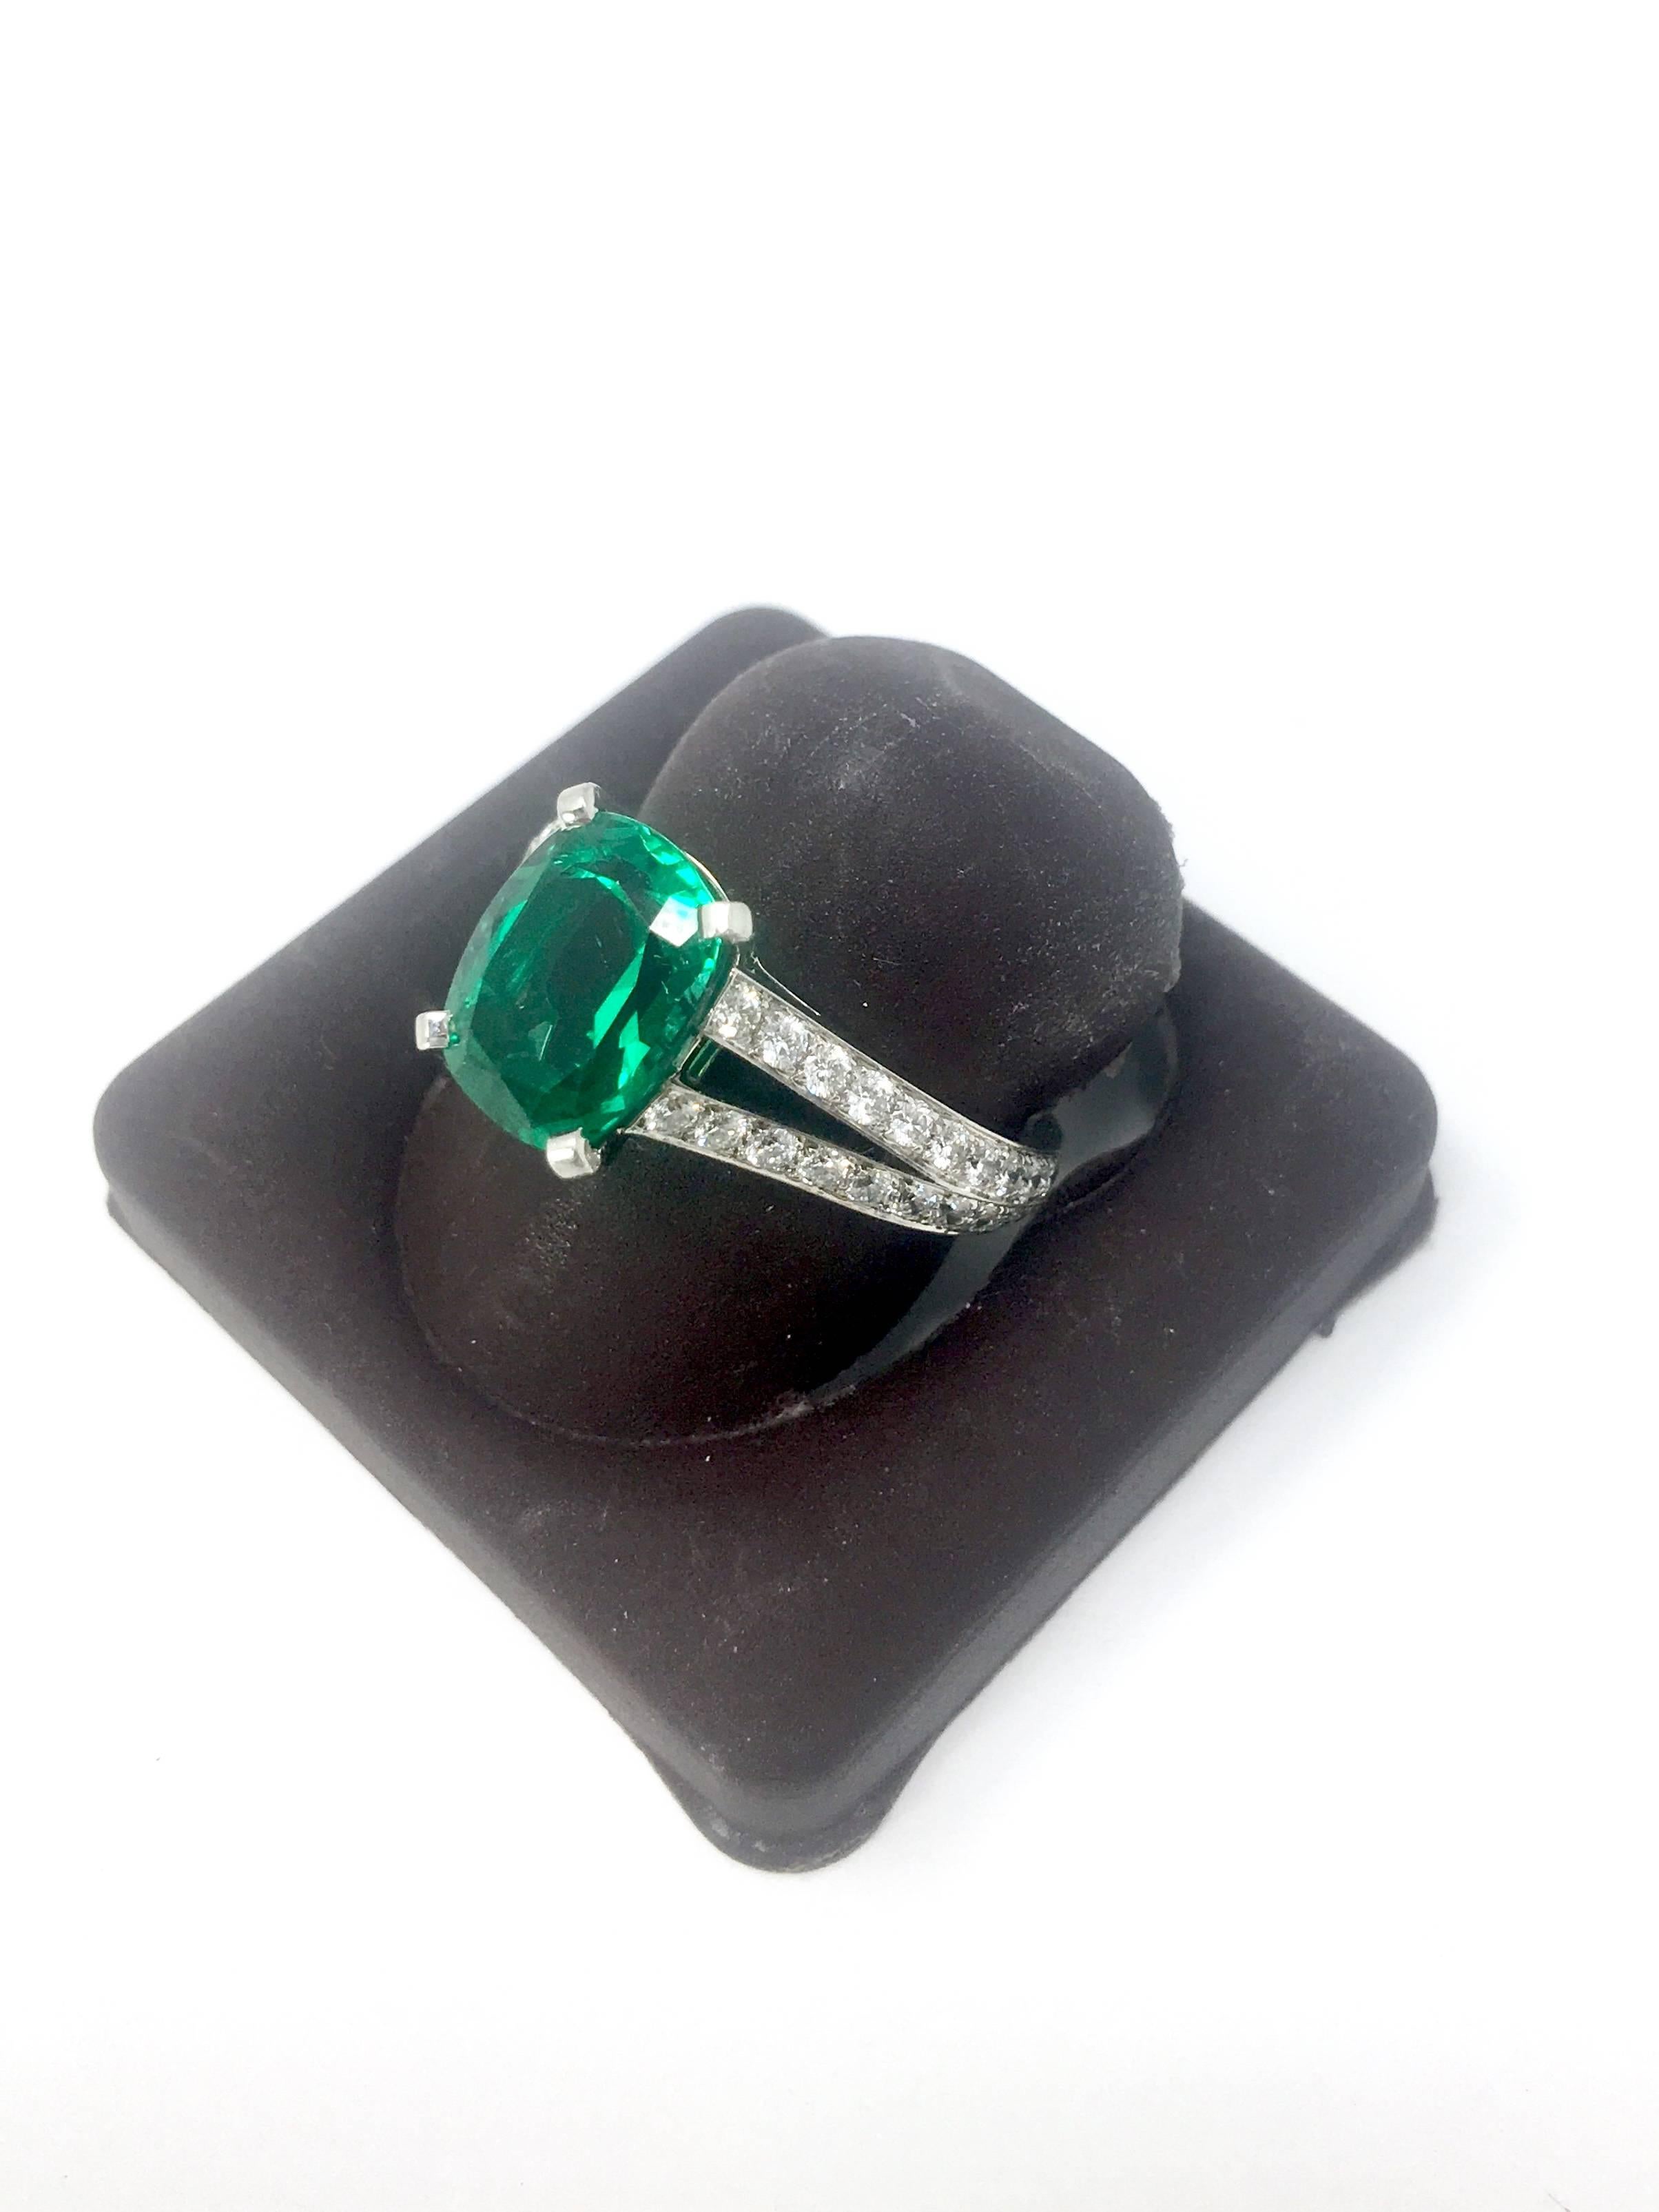 For sale is a lovely designer Cartier Diamond and Emerald Ring! 
The ring is crafted out of Platinum and comes with the Cartier box and papers.
The diamond mounting features forty-eight (48) Round Brilliant Cut diamonds, bead set in a split style